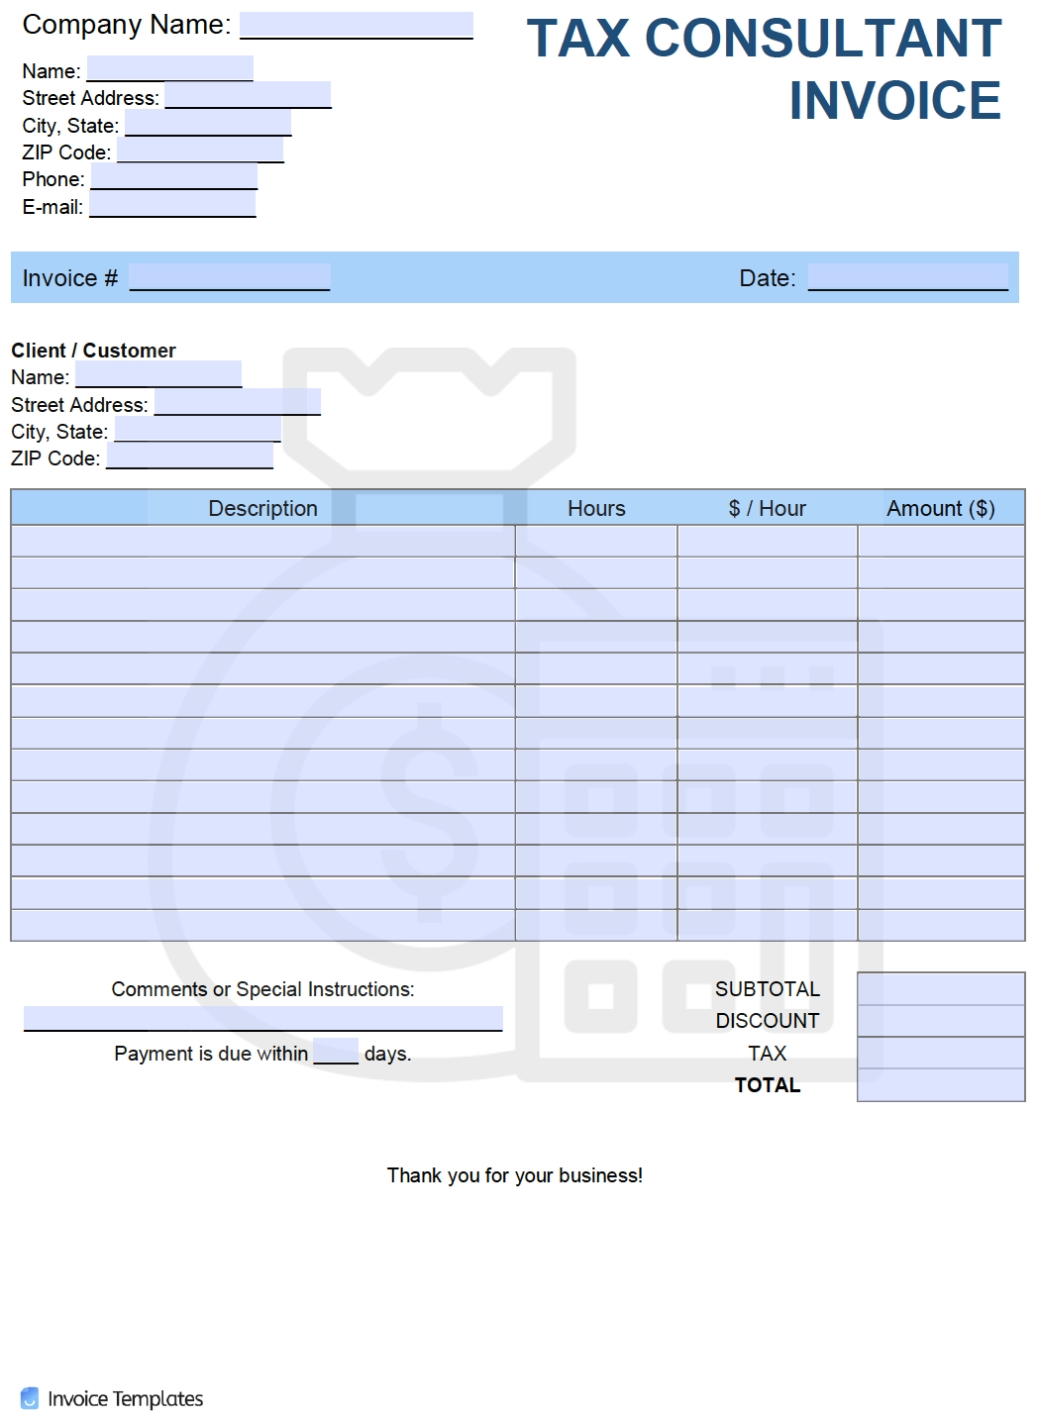 Free Consulting Invoice Template Word Regarding Software Consulting Invoice Template